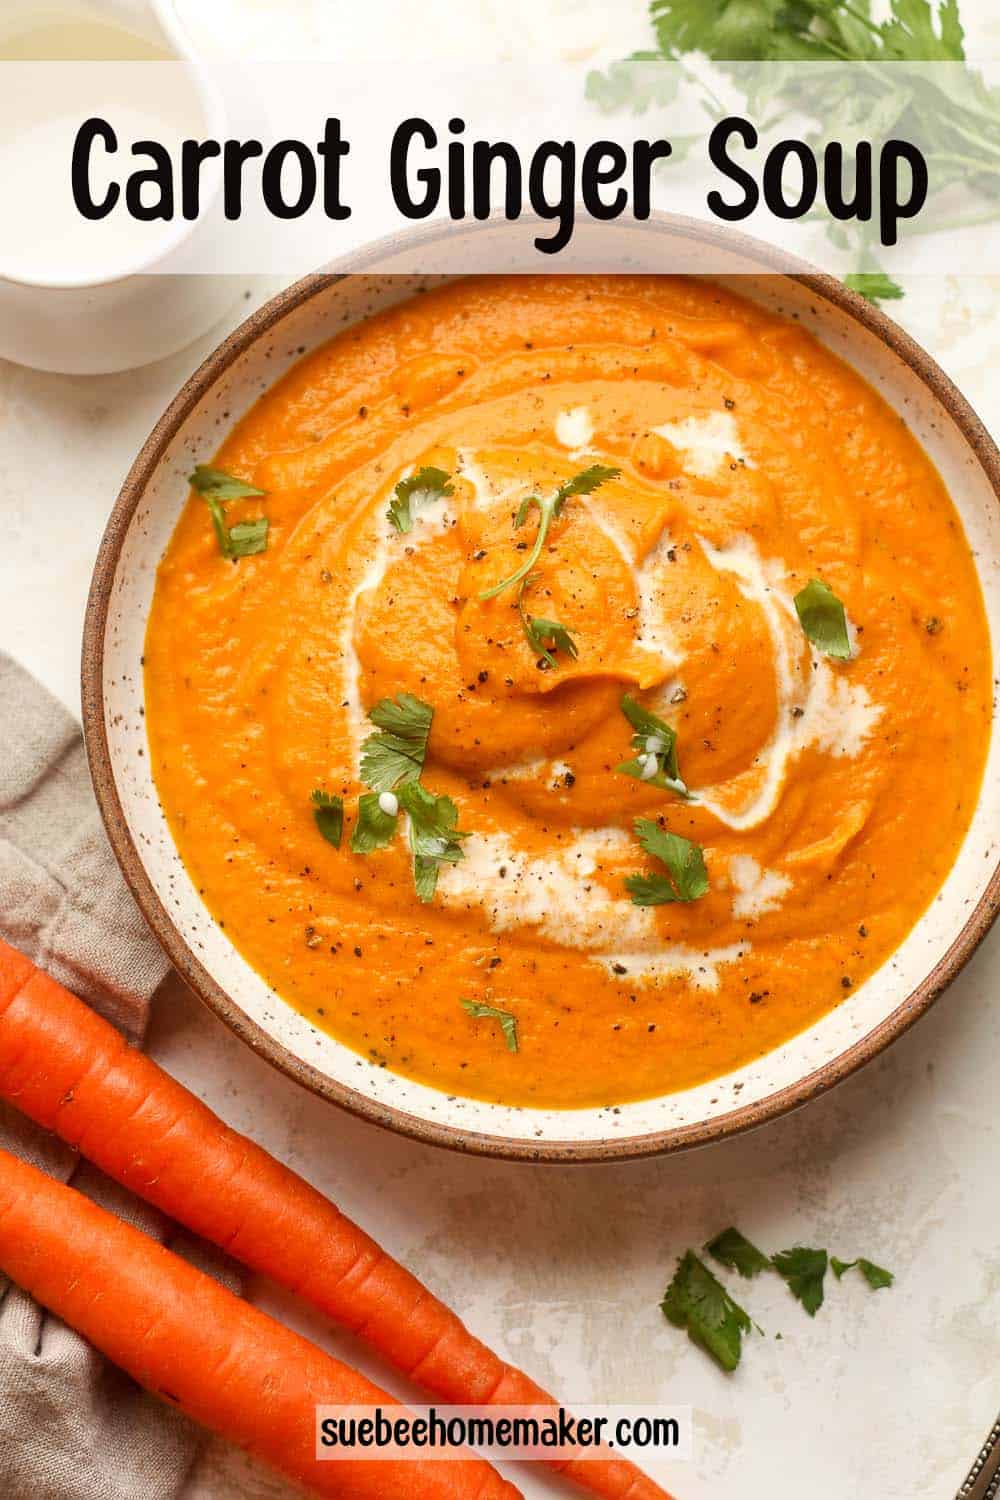 A bowl of carrot ginger soup.